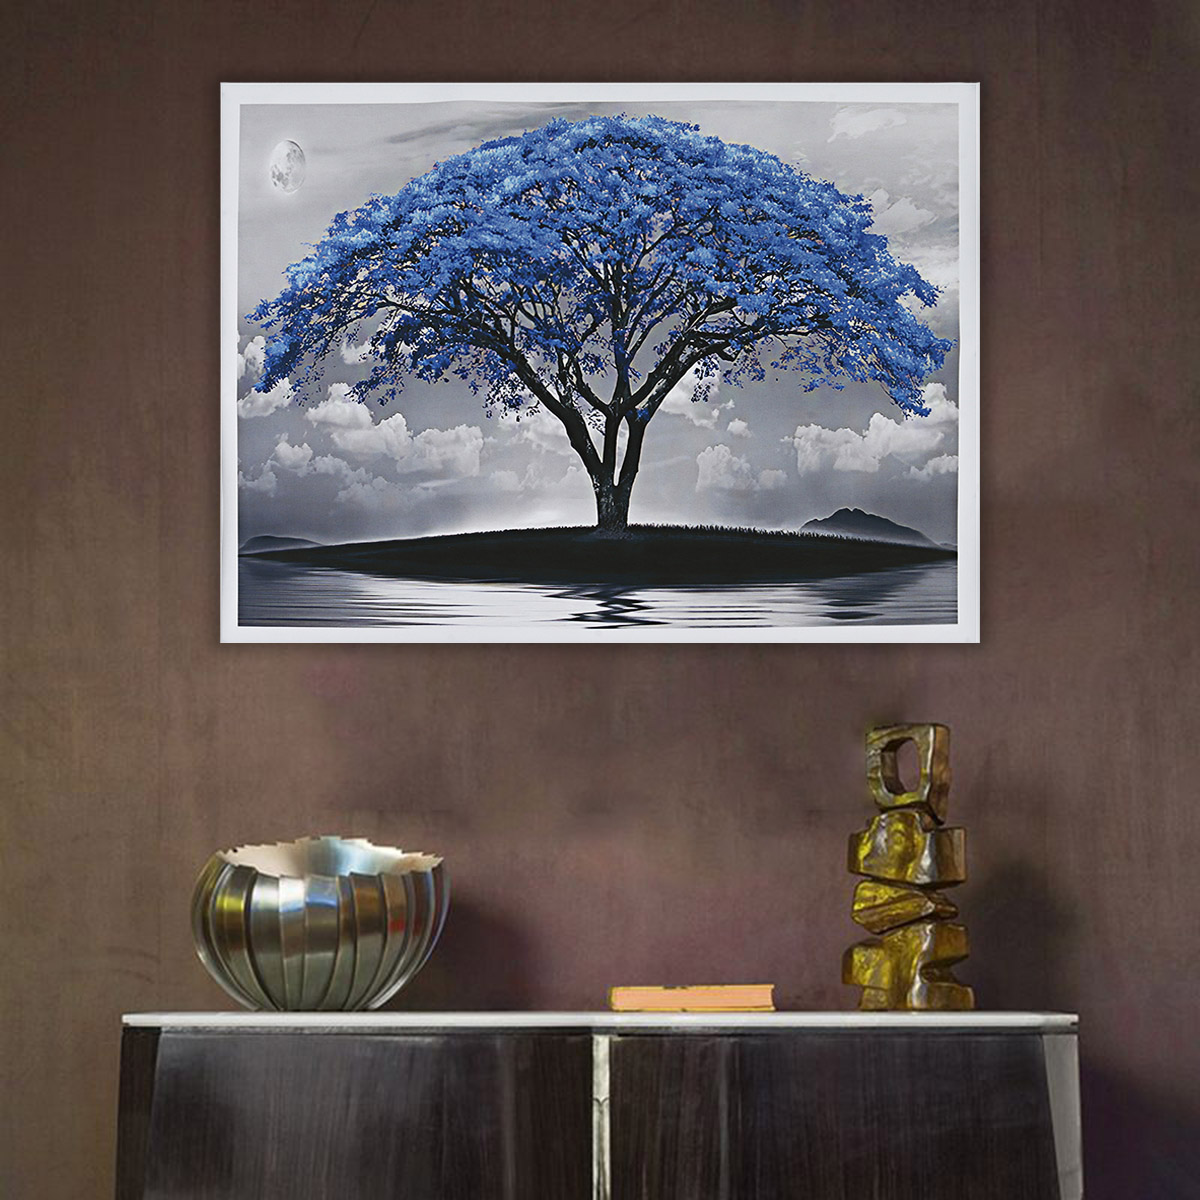 1-Piece-Big-Tree-Canvas-Painting-Wall-Decorative-Print-Art-Picture-Unframed-Wall-Hanging-Home-Office-1785043-17